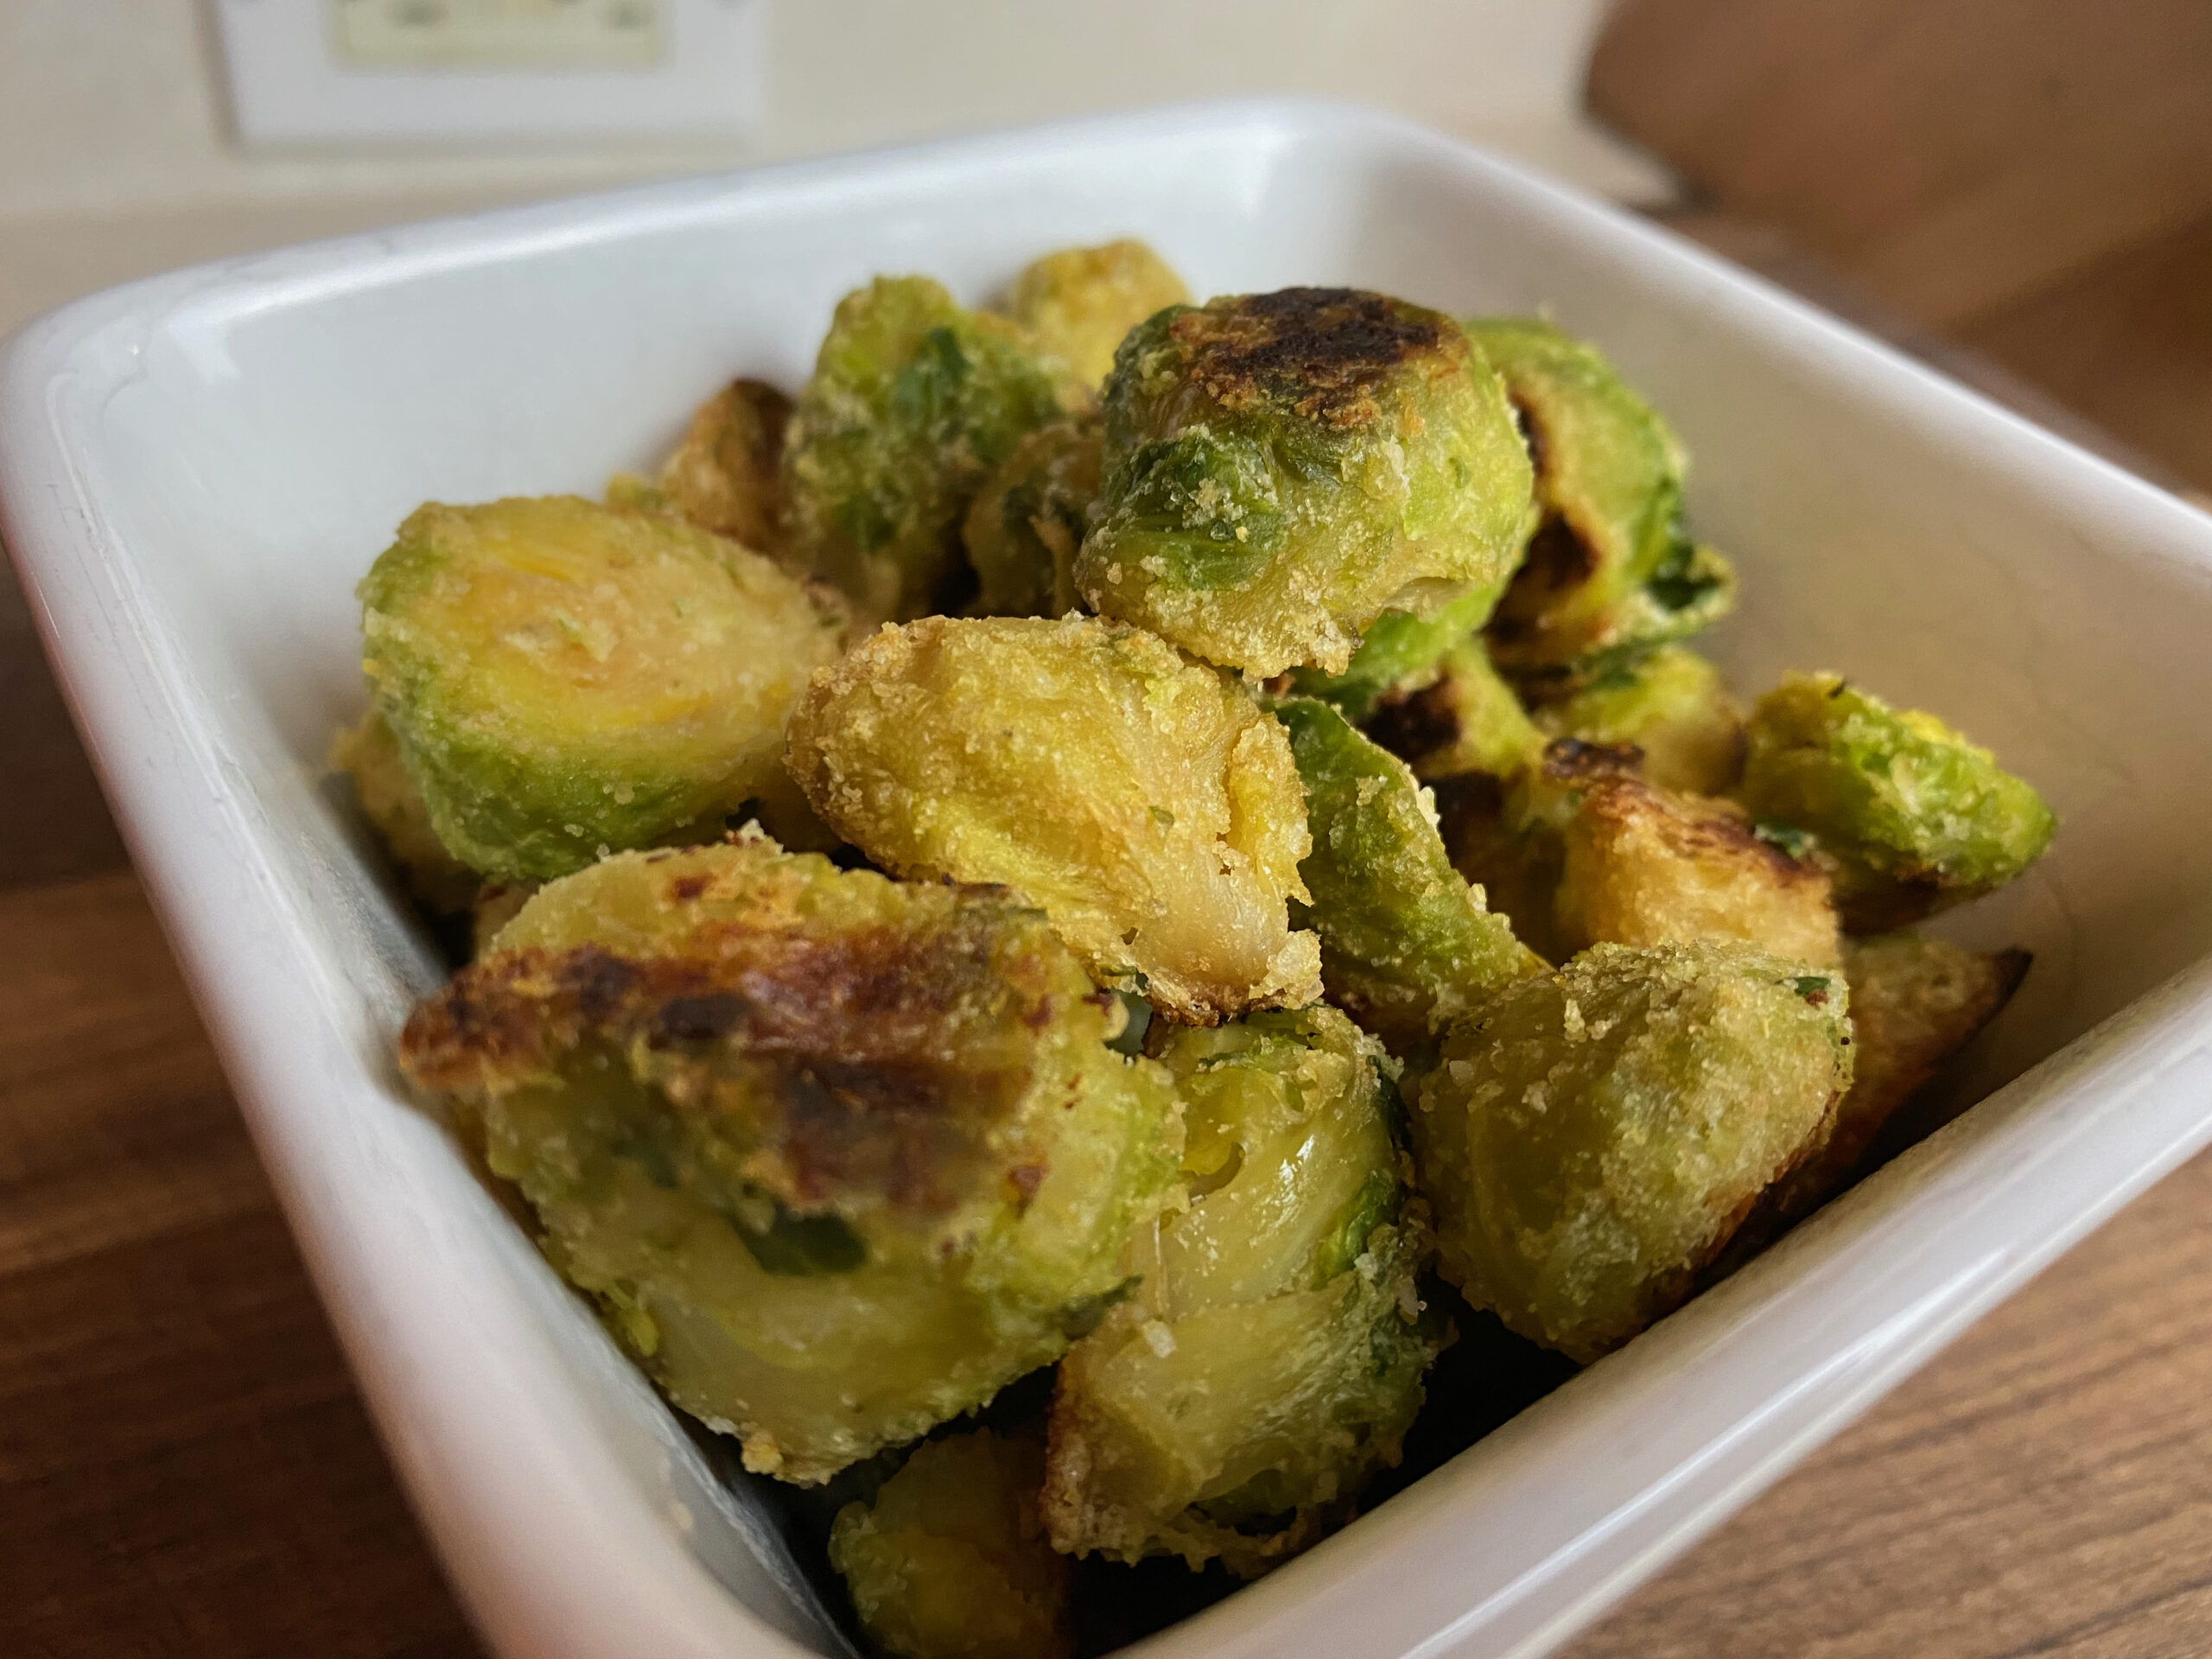 a bowl of brussels sprouts